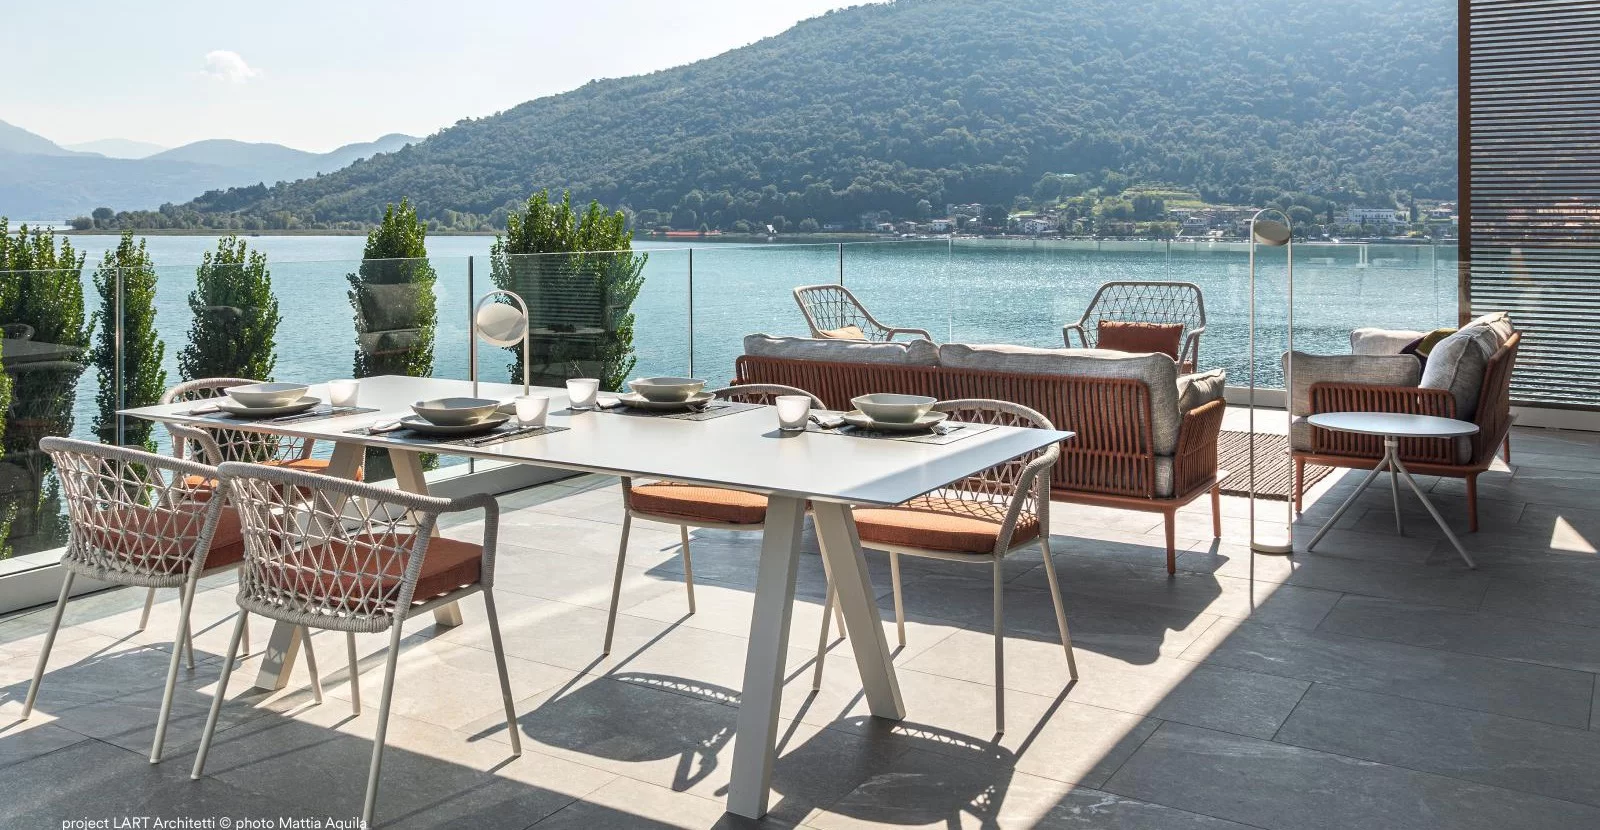 Buy Pedrali chairs and tables made in Italy on Marchese 1930